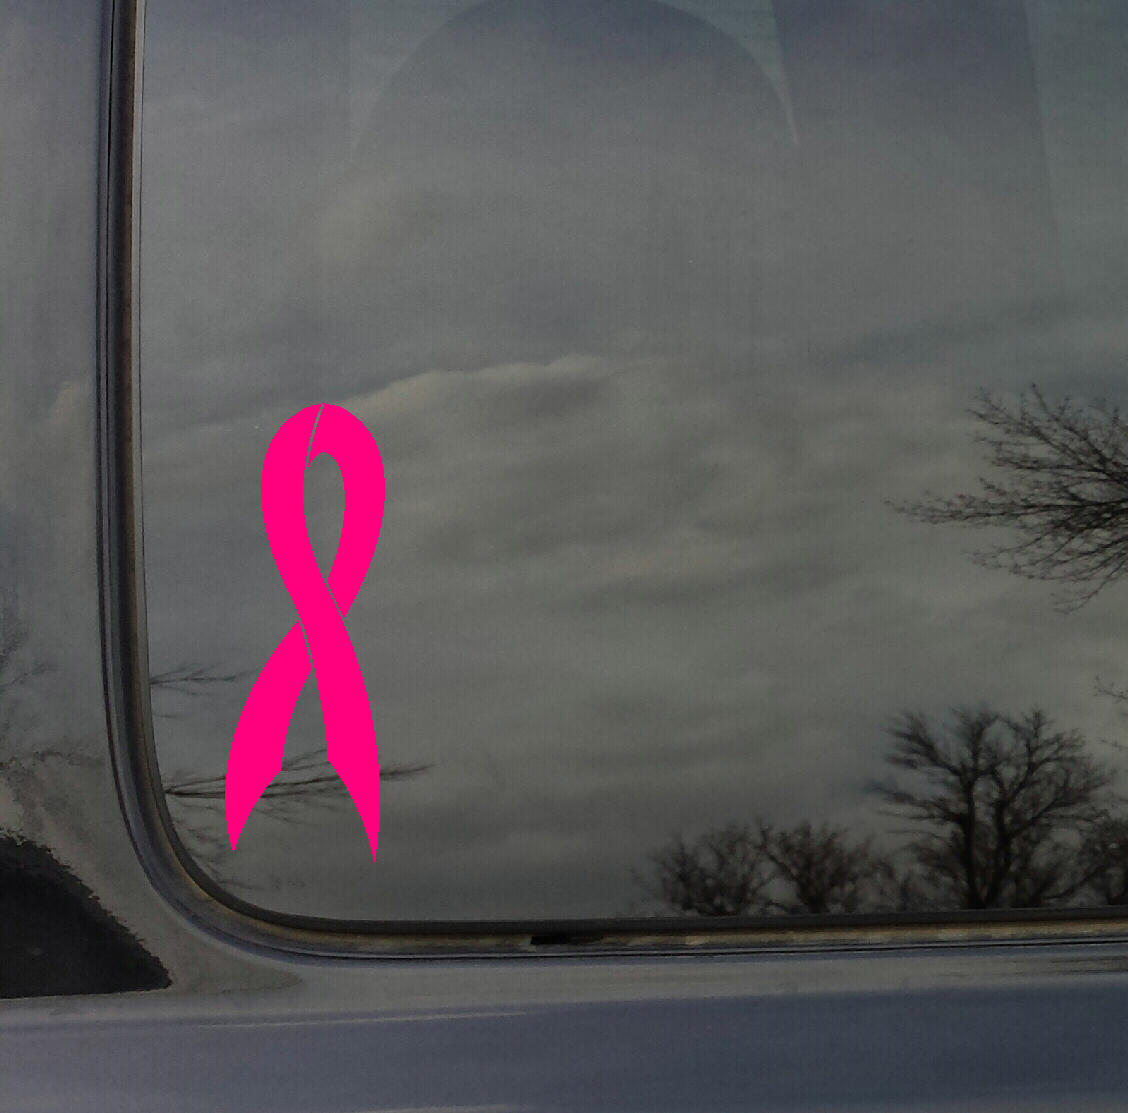 Breast Cancer Awareness Car Decal Sticker in Hot Pink